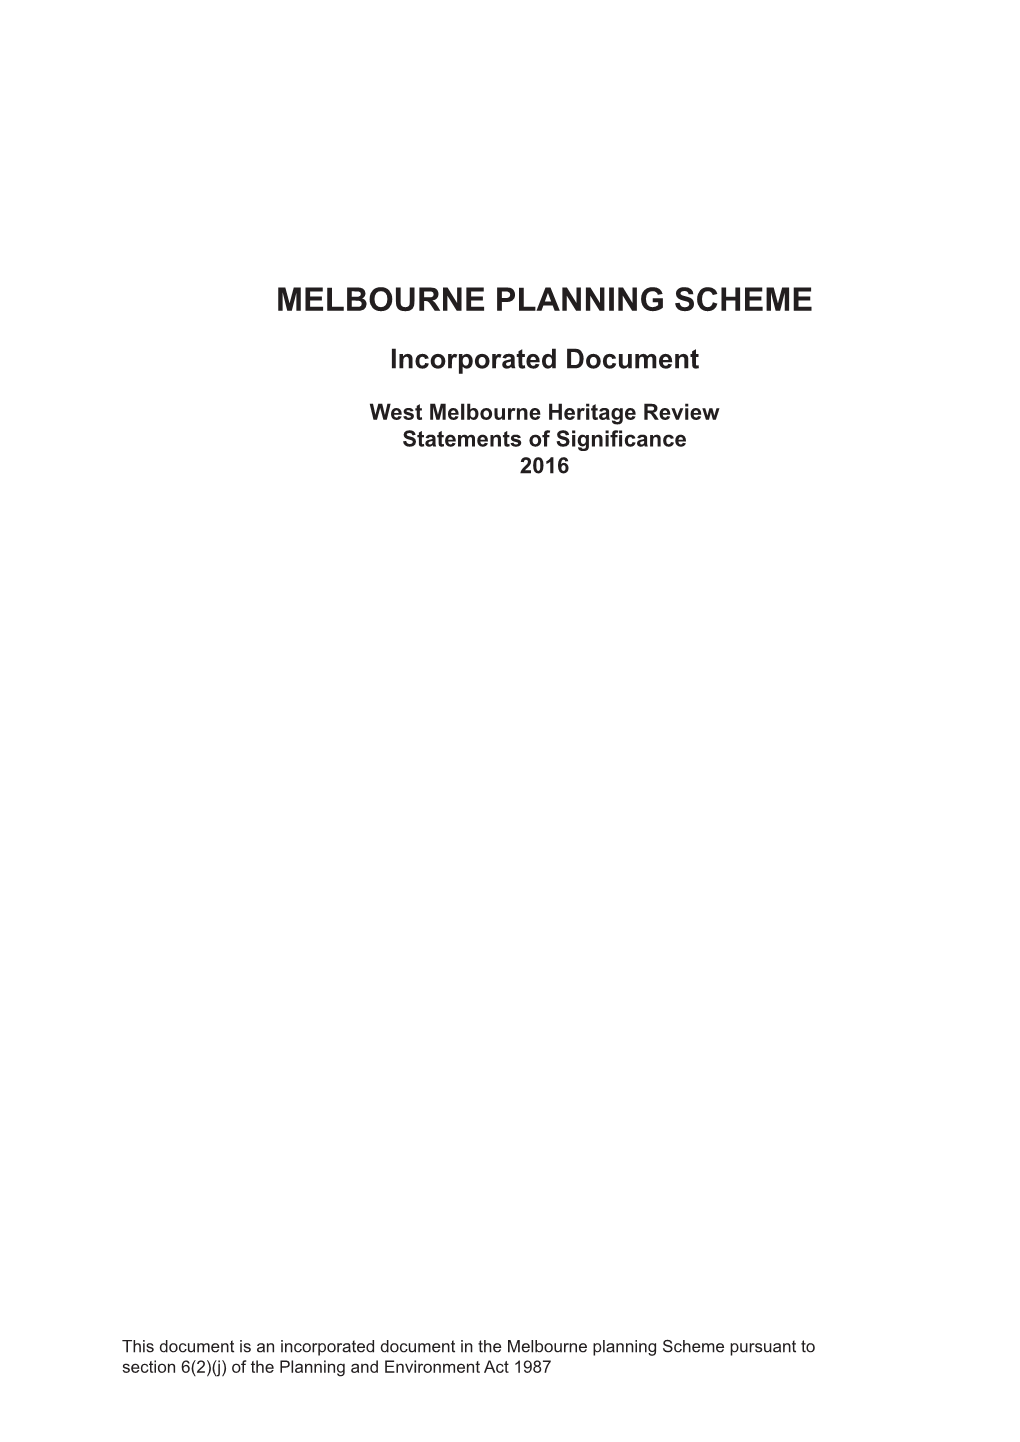 West Melbourne Heritage Review Statements of Significance 2016